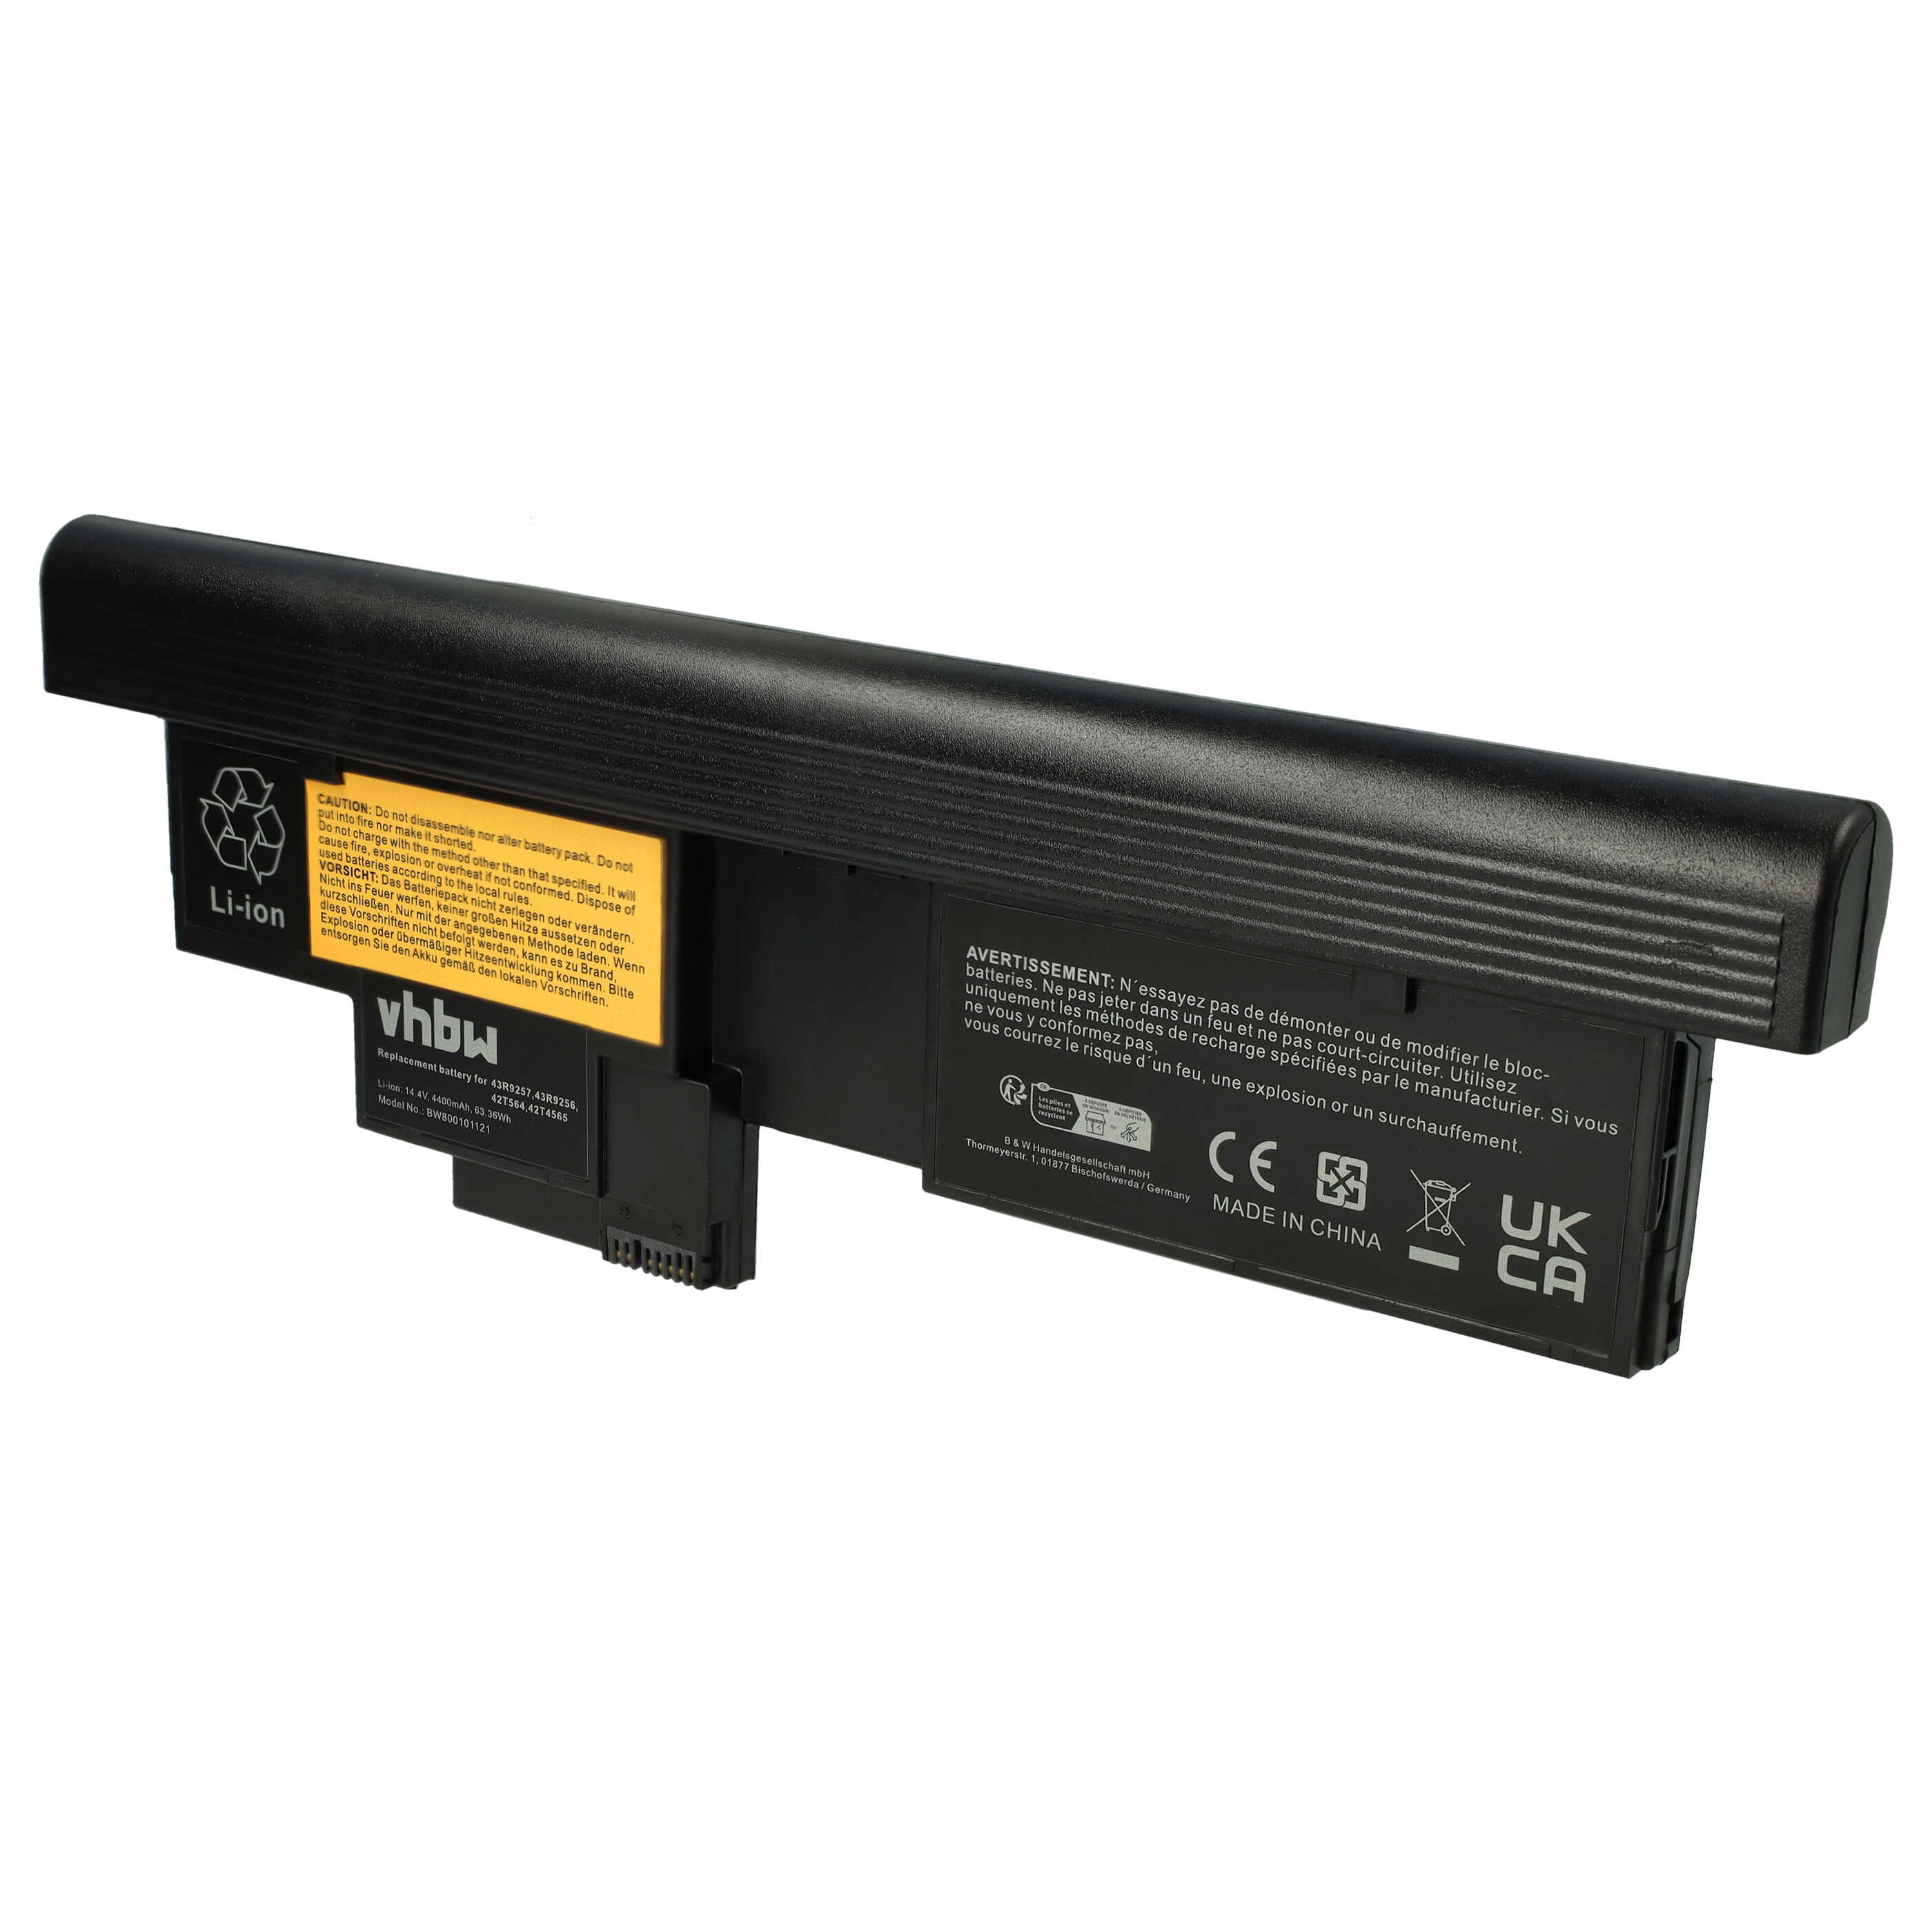 Tablet Battery Replacement for Lenovo 42T4565, 42T4564, 42T4658, 42T4657, 43R9256 - 4400mAh 14.4V Li-Ion